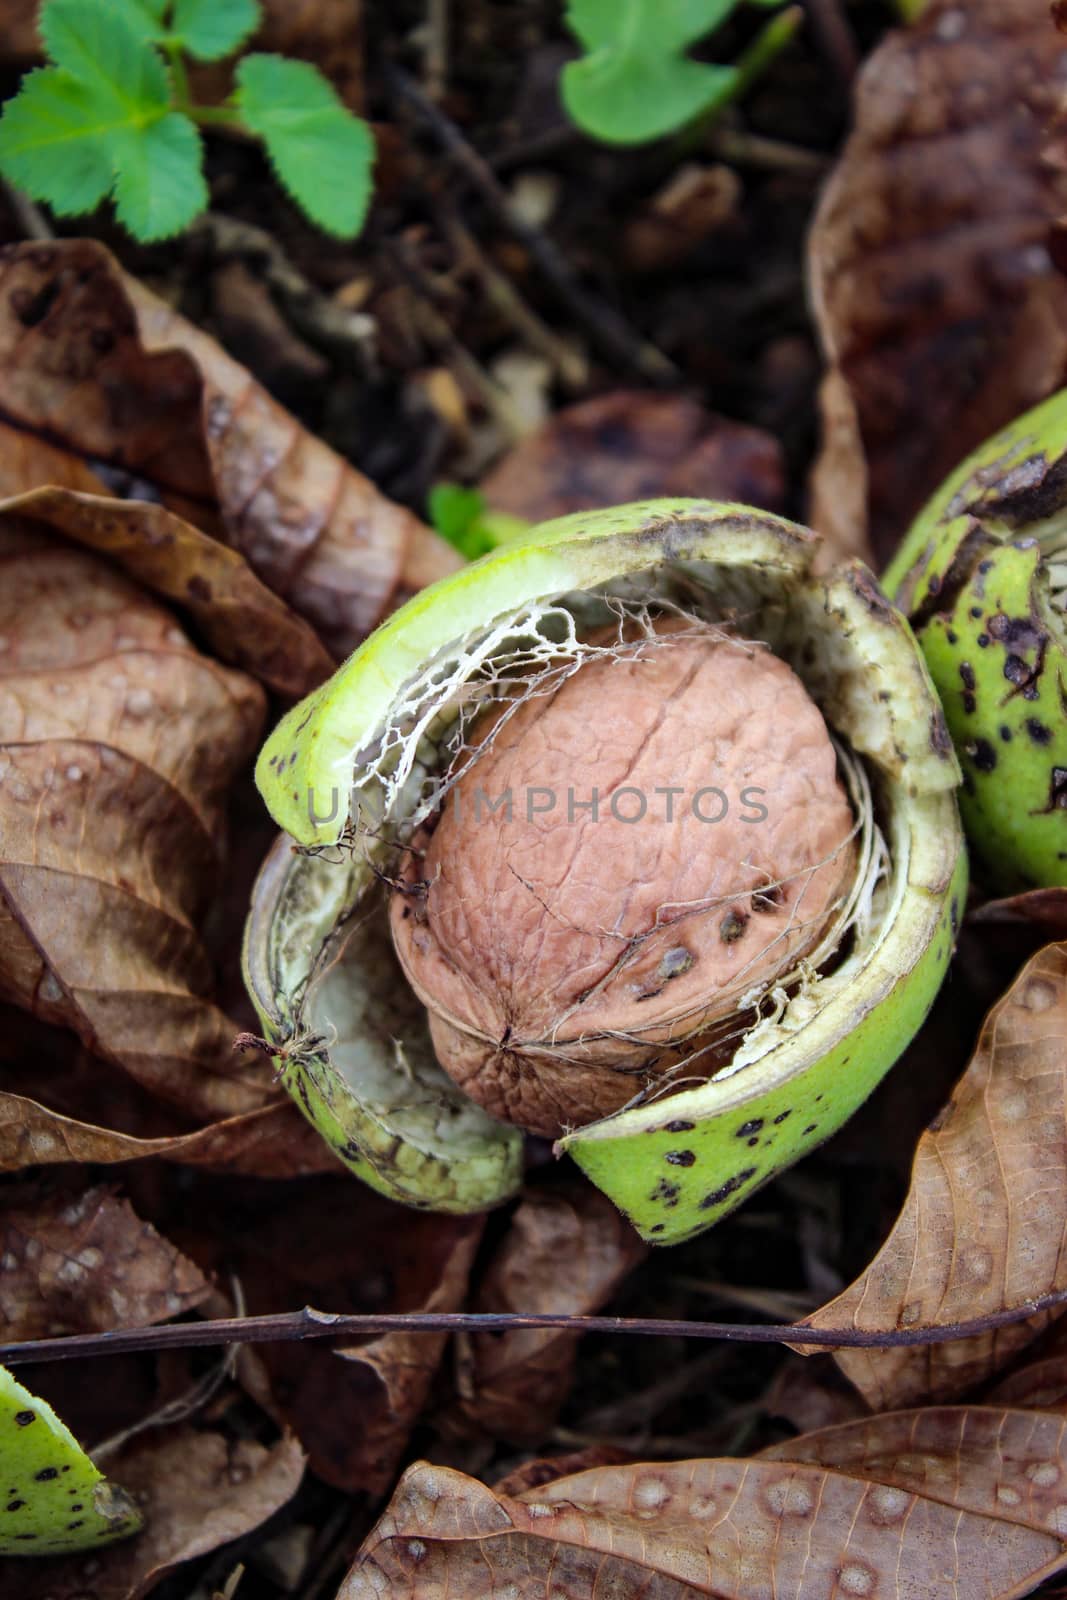 Vertical shot. A photograph of a walnut inside a cracked green shell. Beneath the walnuts are dry leaves and green grass. Zavidovici, Bosnia and Herzegovina.